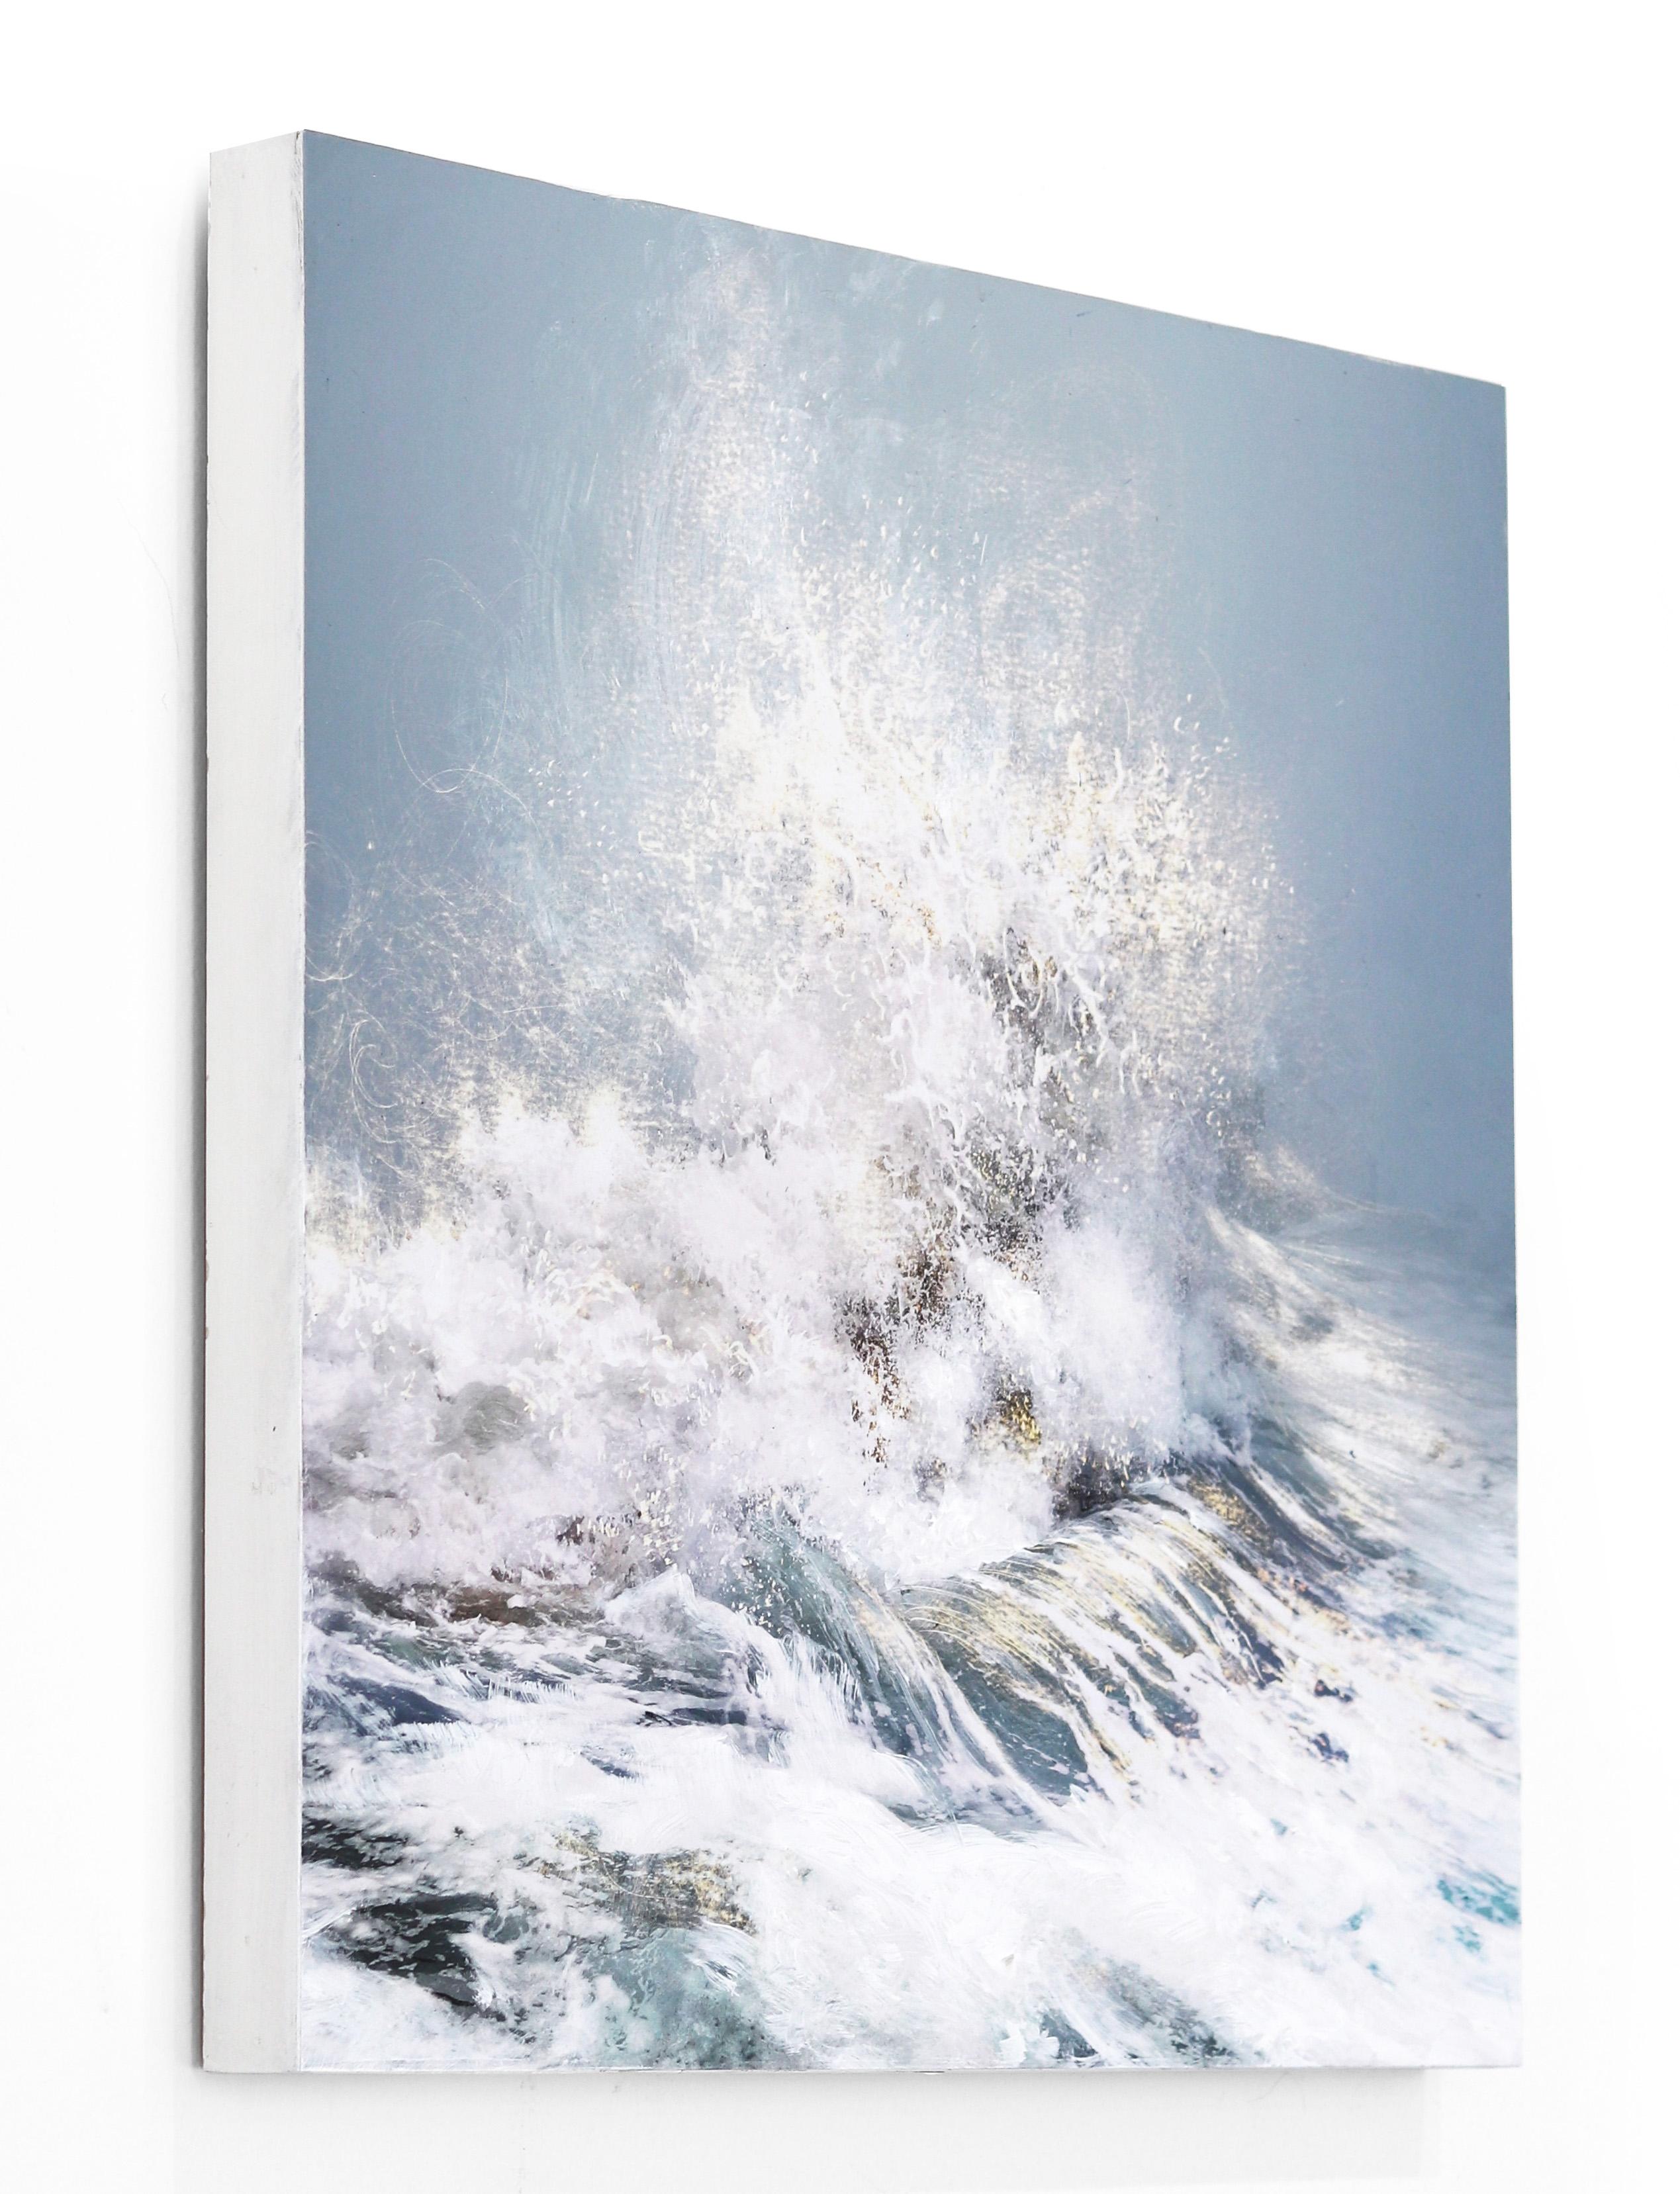 Heart & Soul Opens No. 1 - Photorealistic Painting of Powerful Ocean Waves For Sale 1